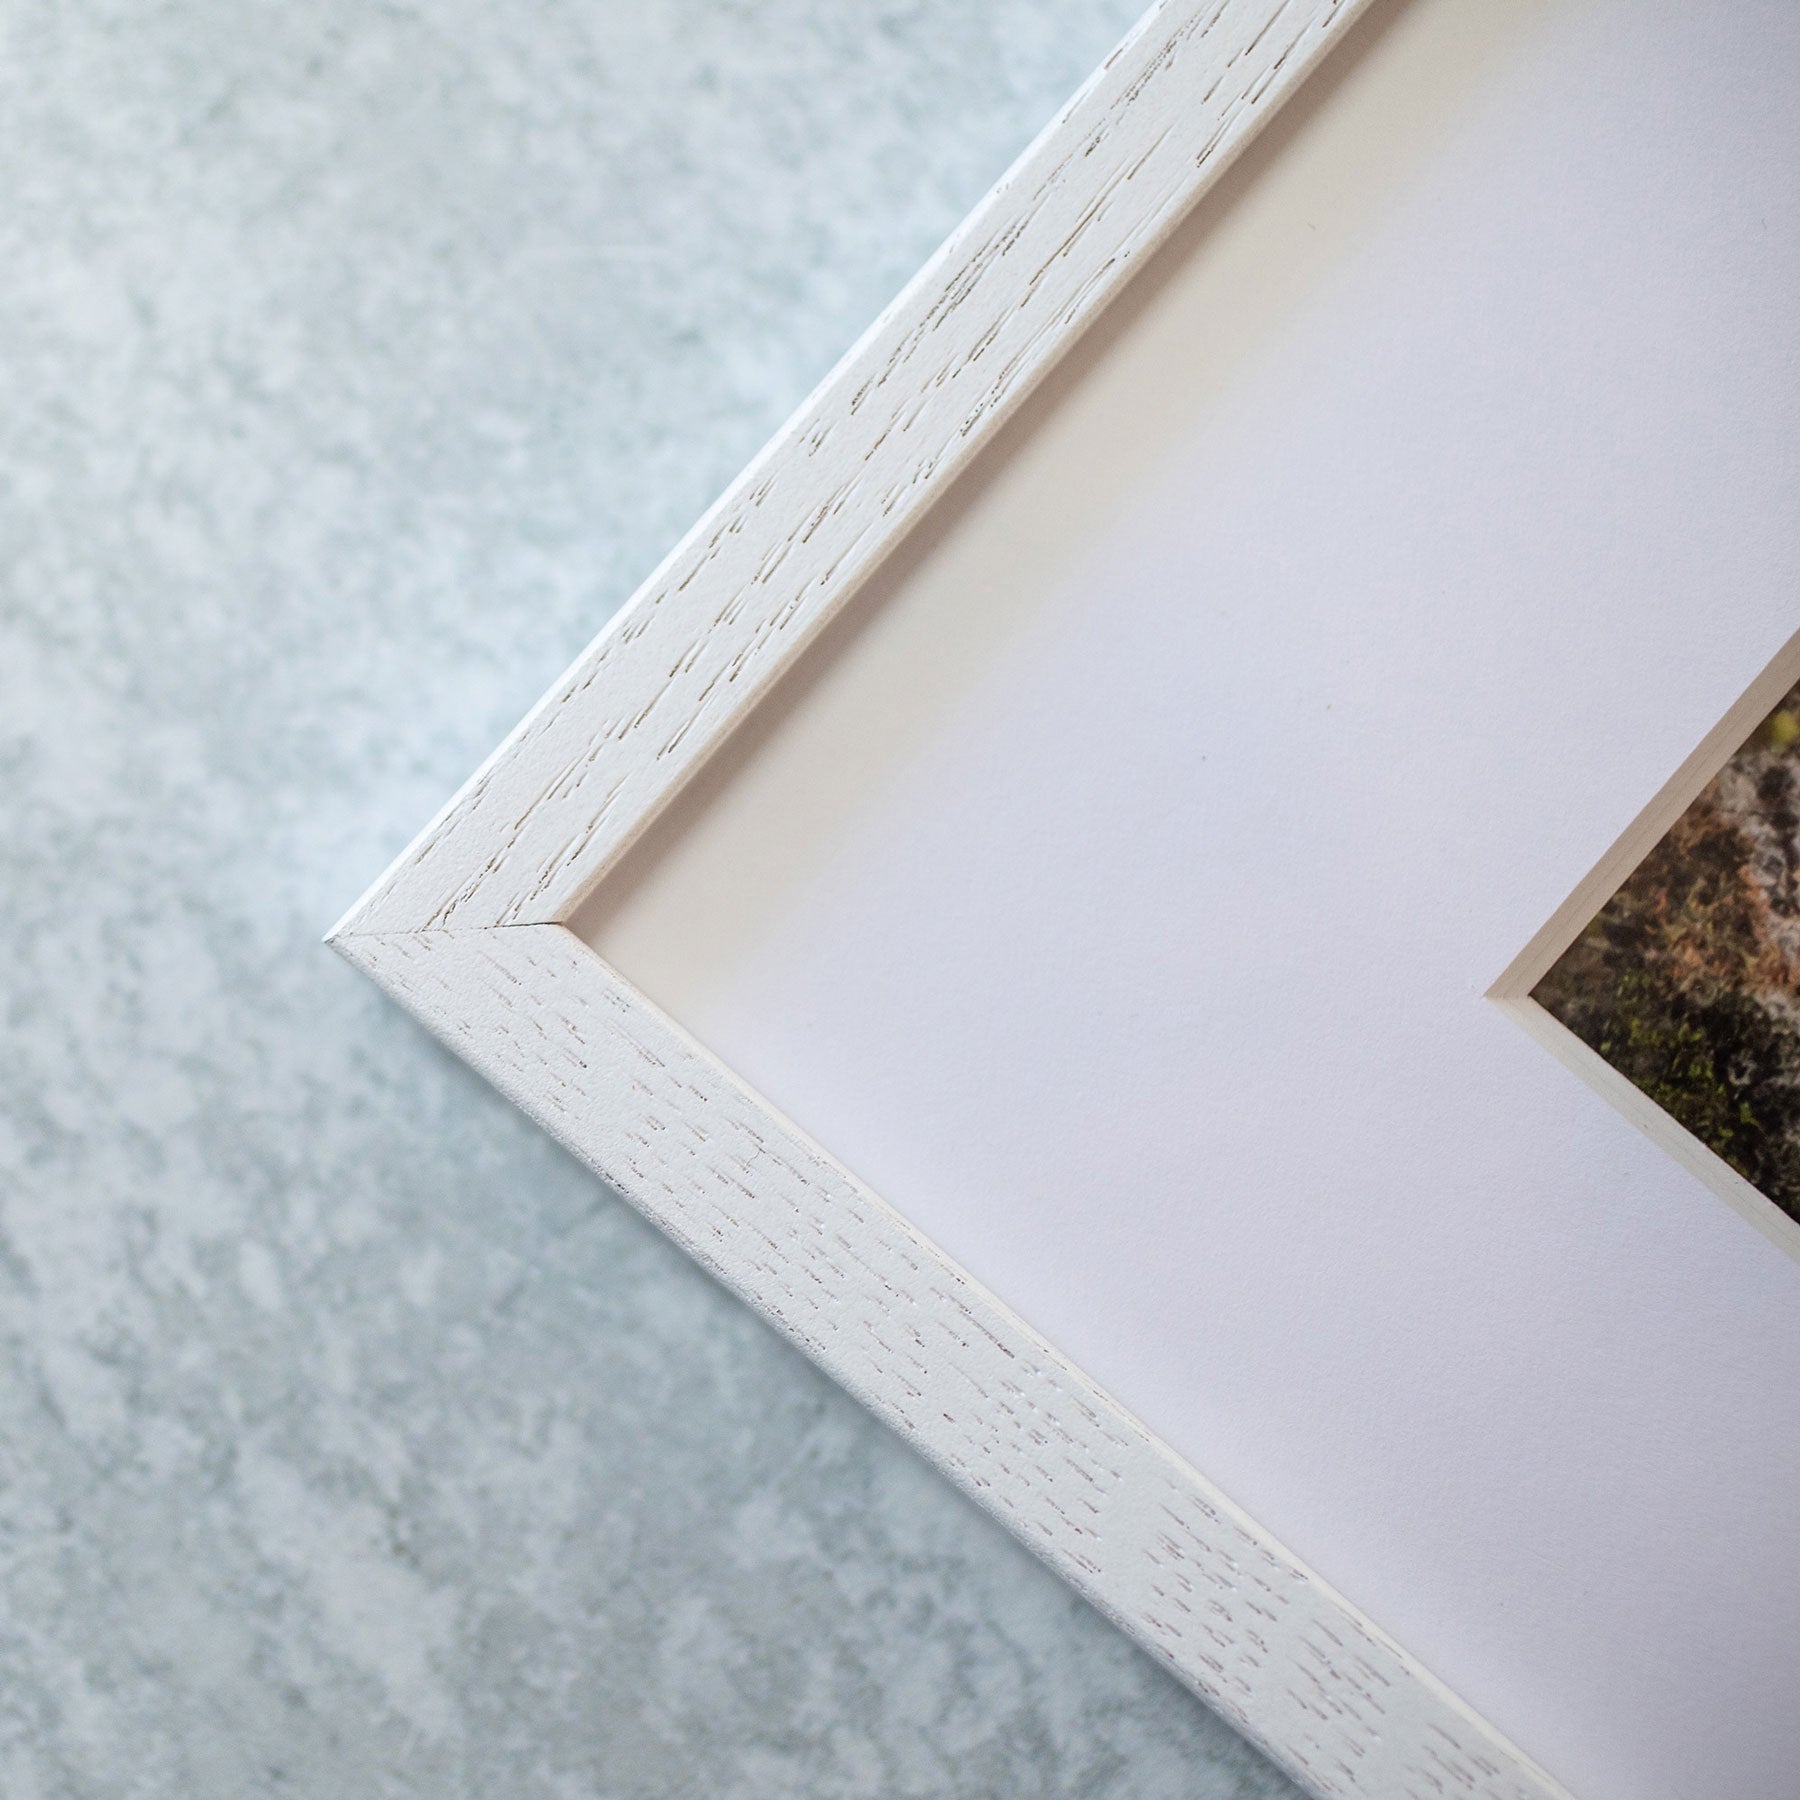 Close-up of a Large White Daisy Flower Print photo frame from Offley Green on a light gray surface, displaying a partial view of a photograph with floral elements.